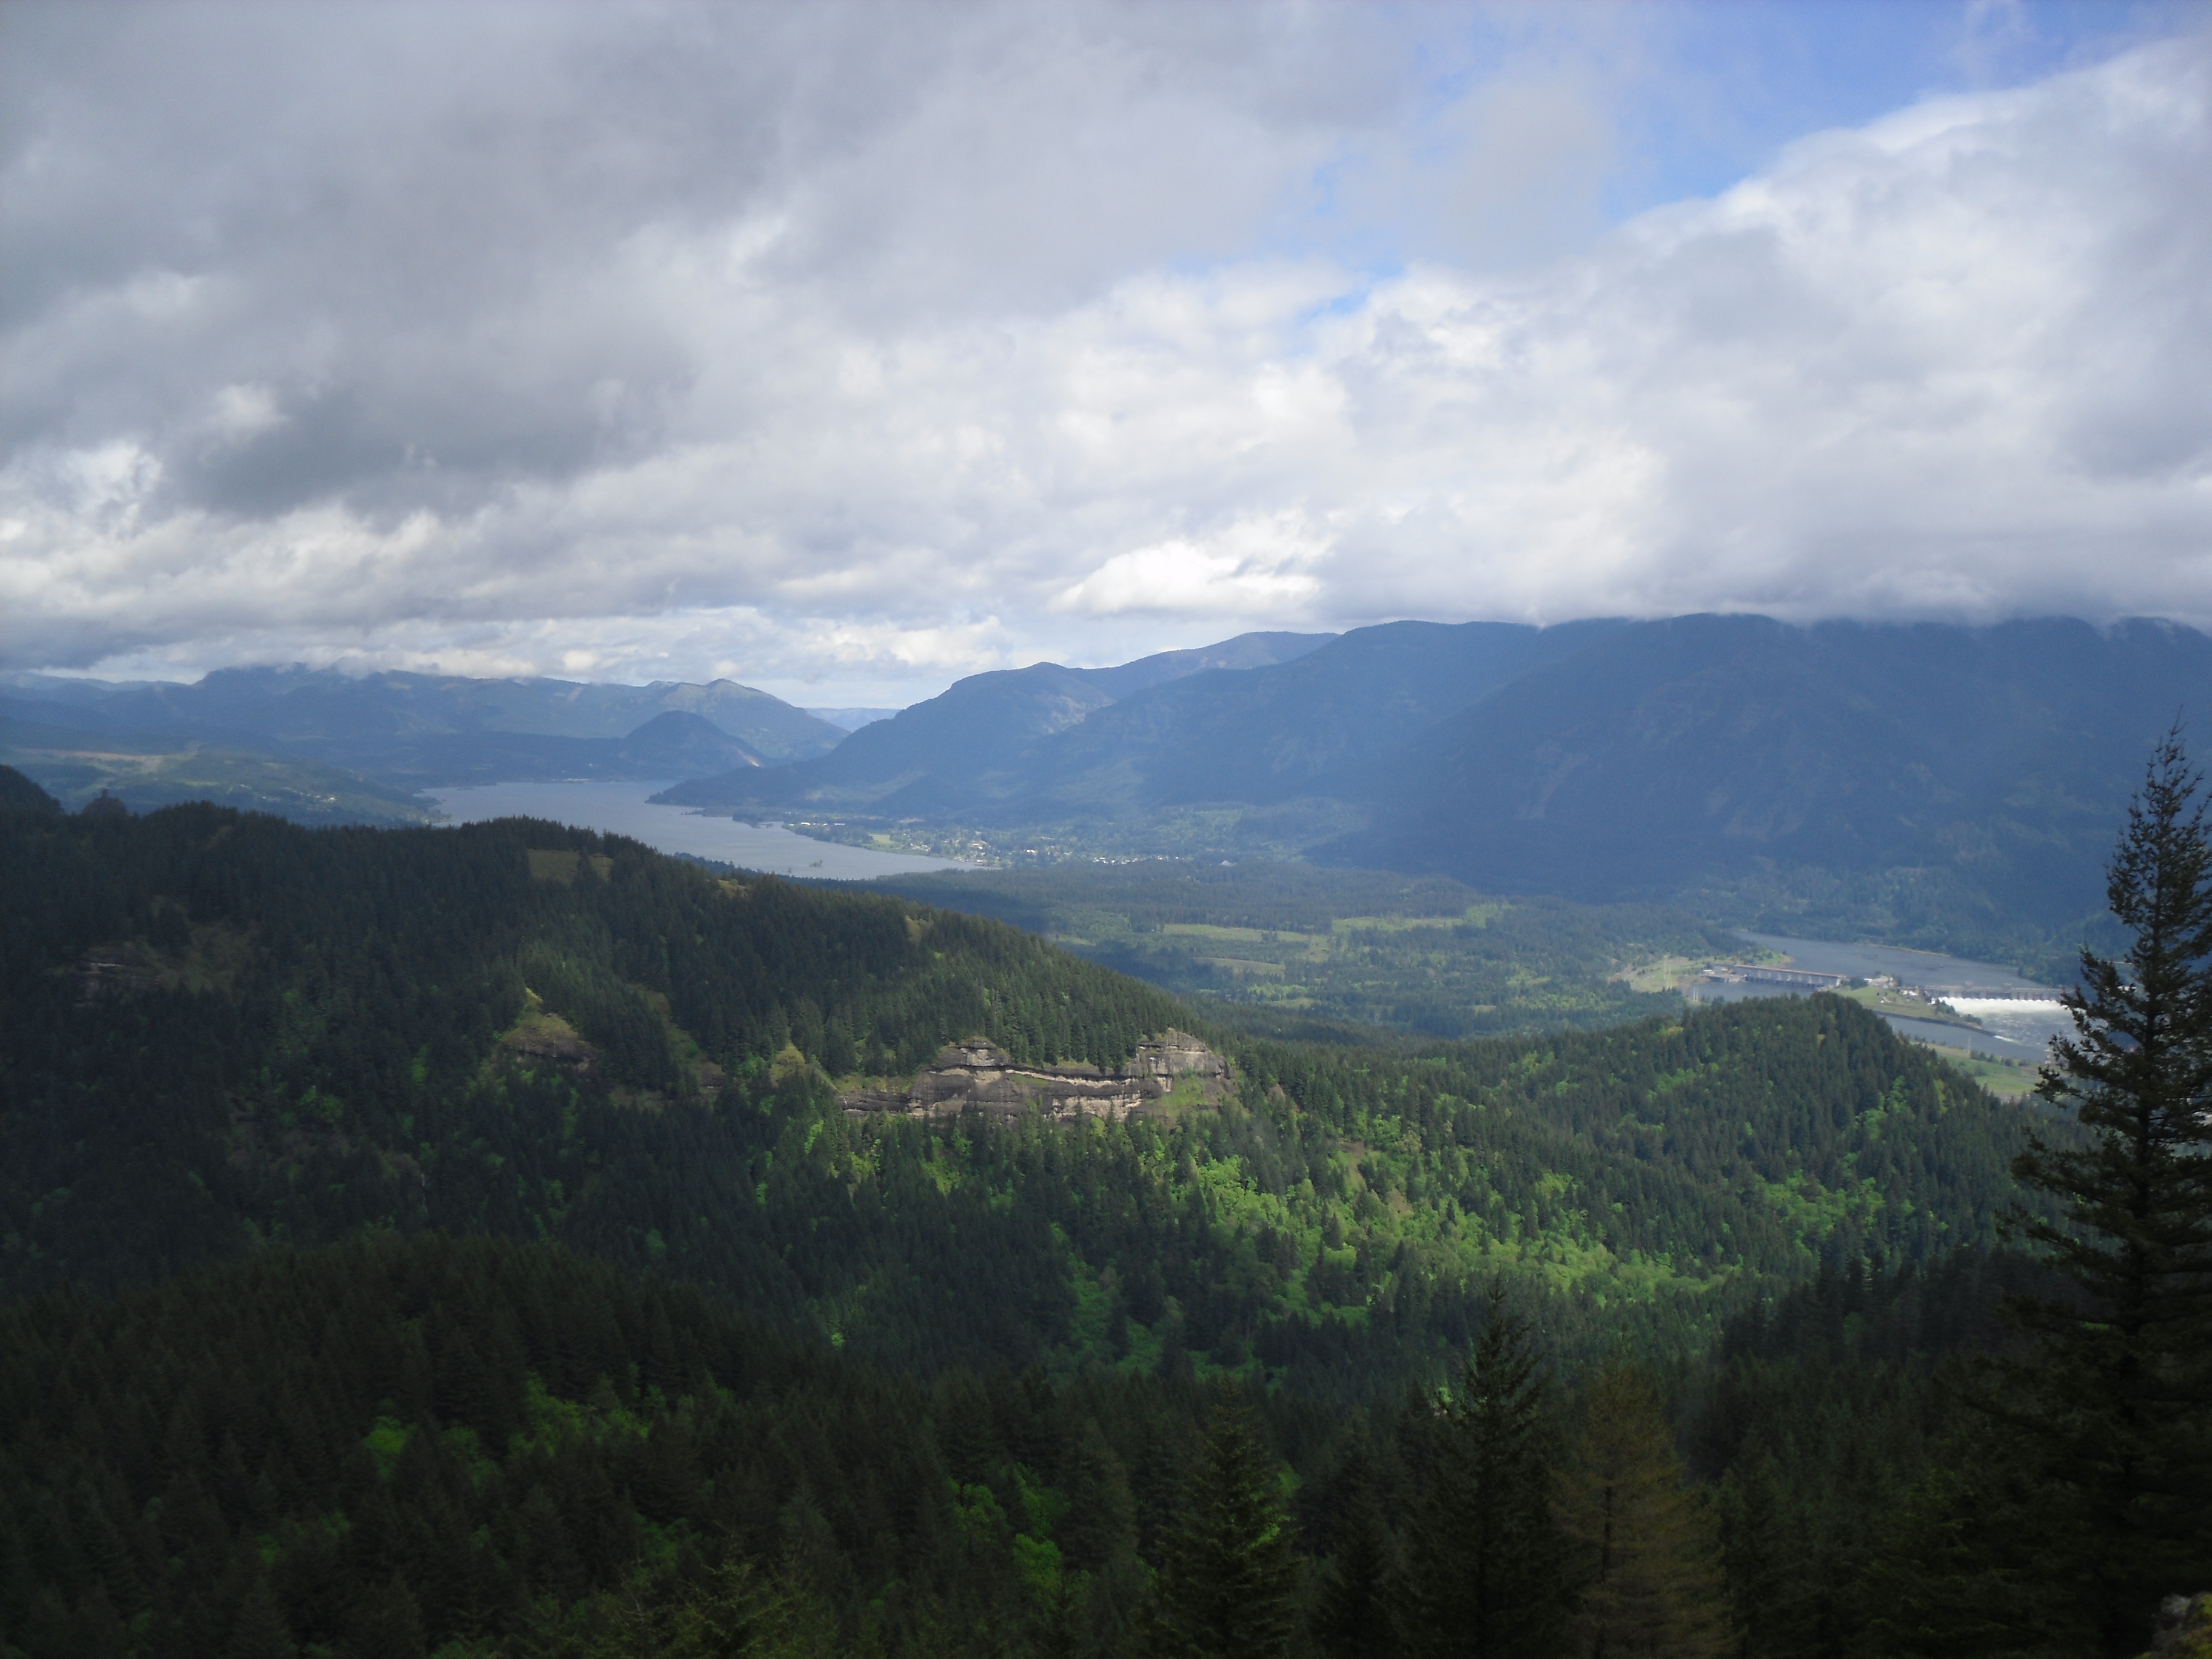 A photograph of the view of the Columbia River Gorge, Washington State side, from the Hamilton Mountain Trail